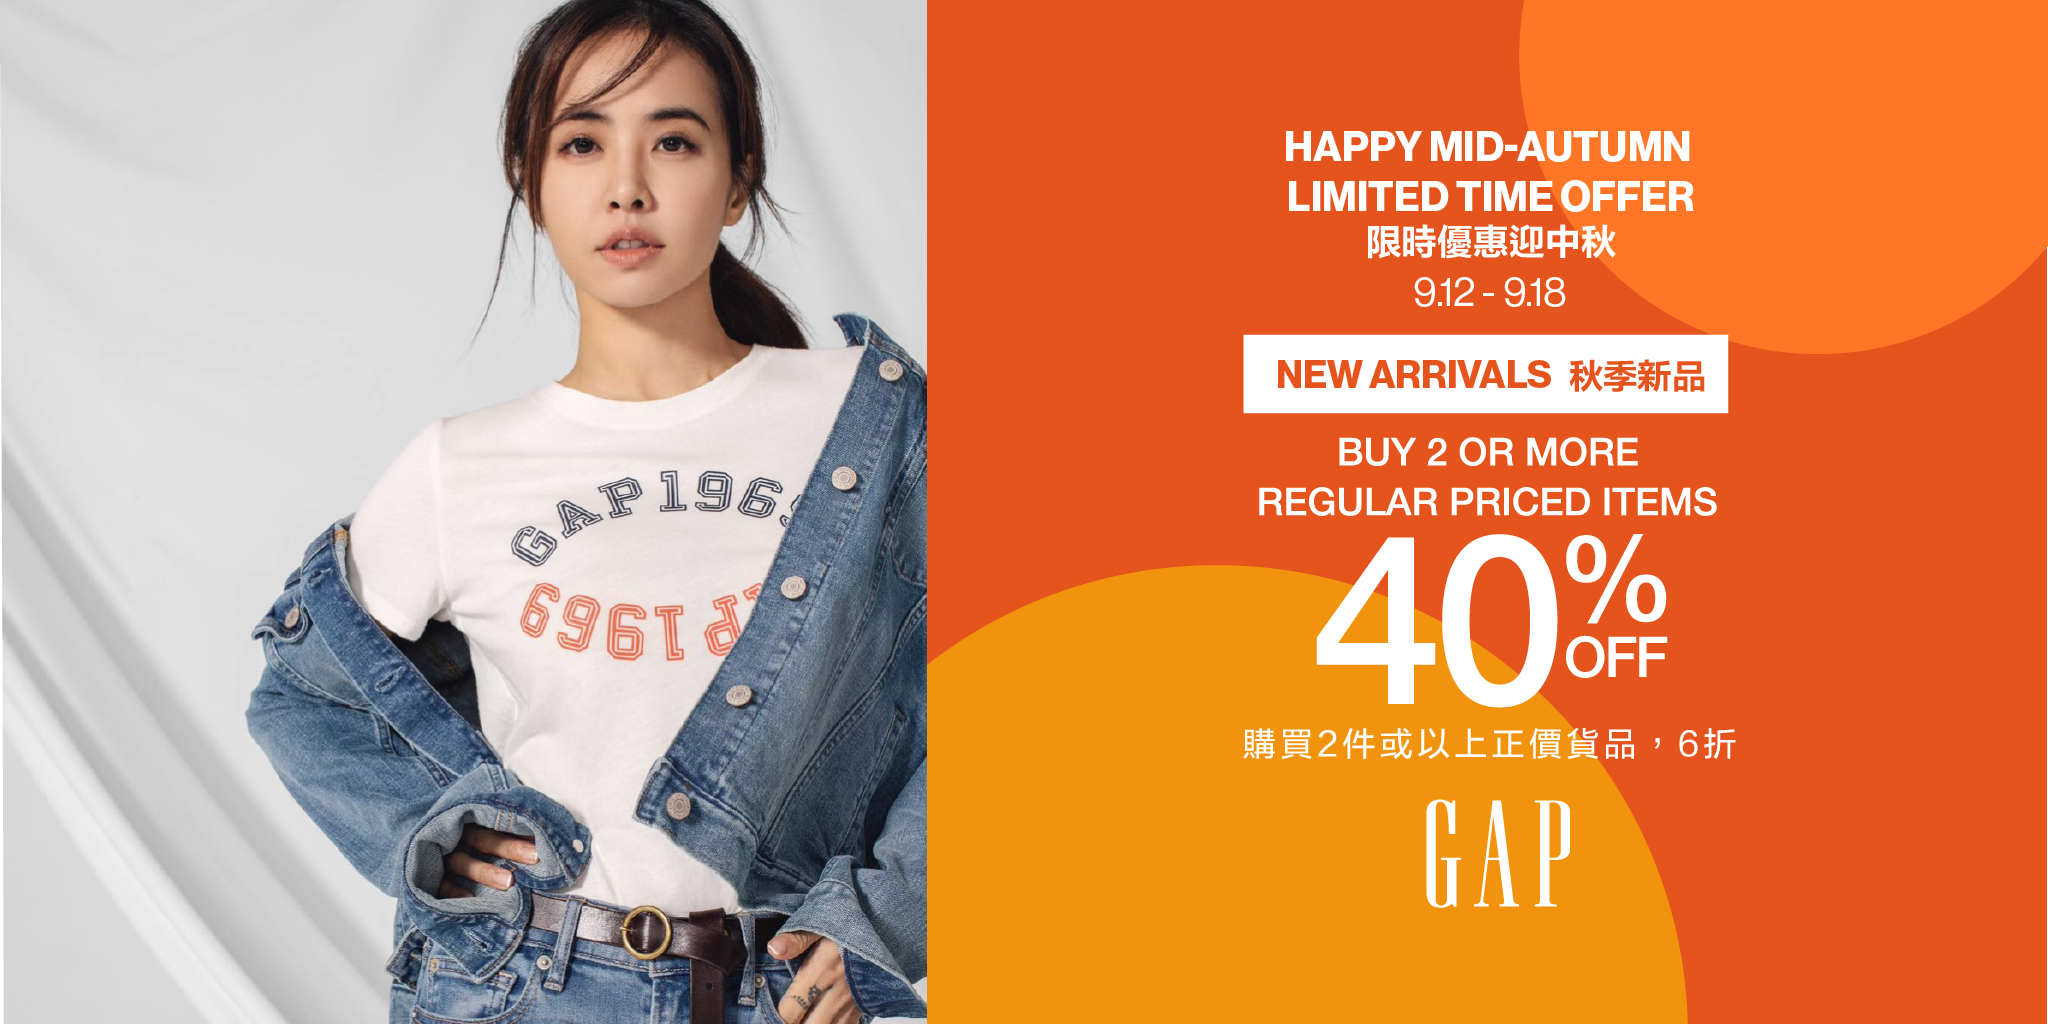 【Mid-Autumn Limited Time Offers | 限時優惠迎中秋】